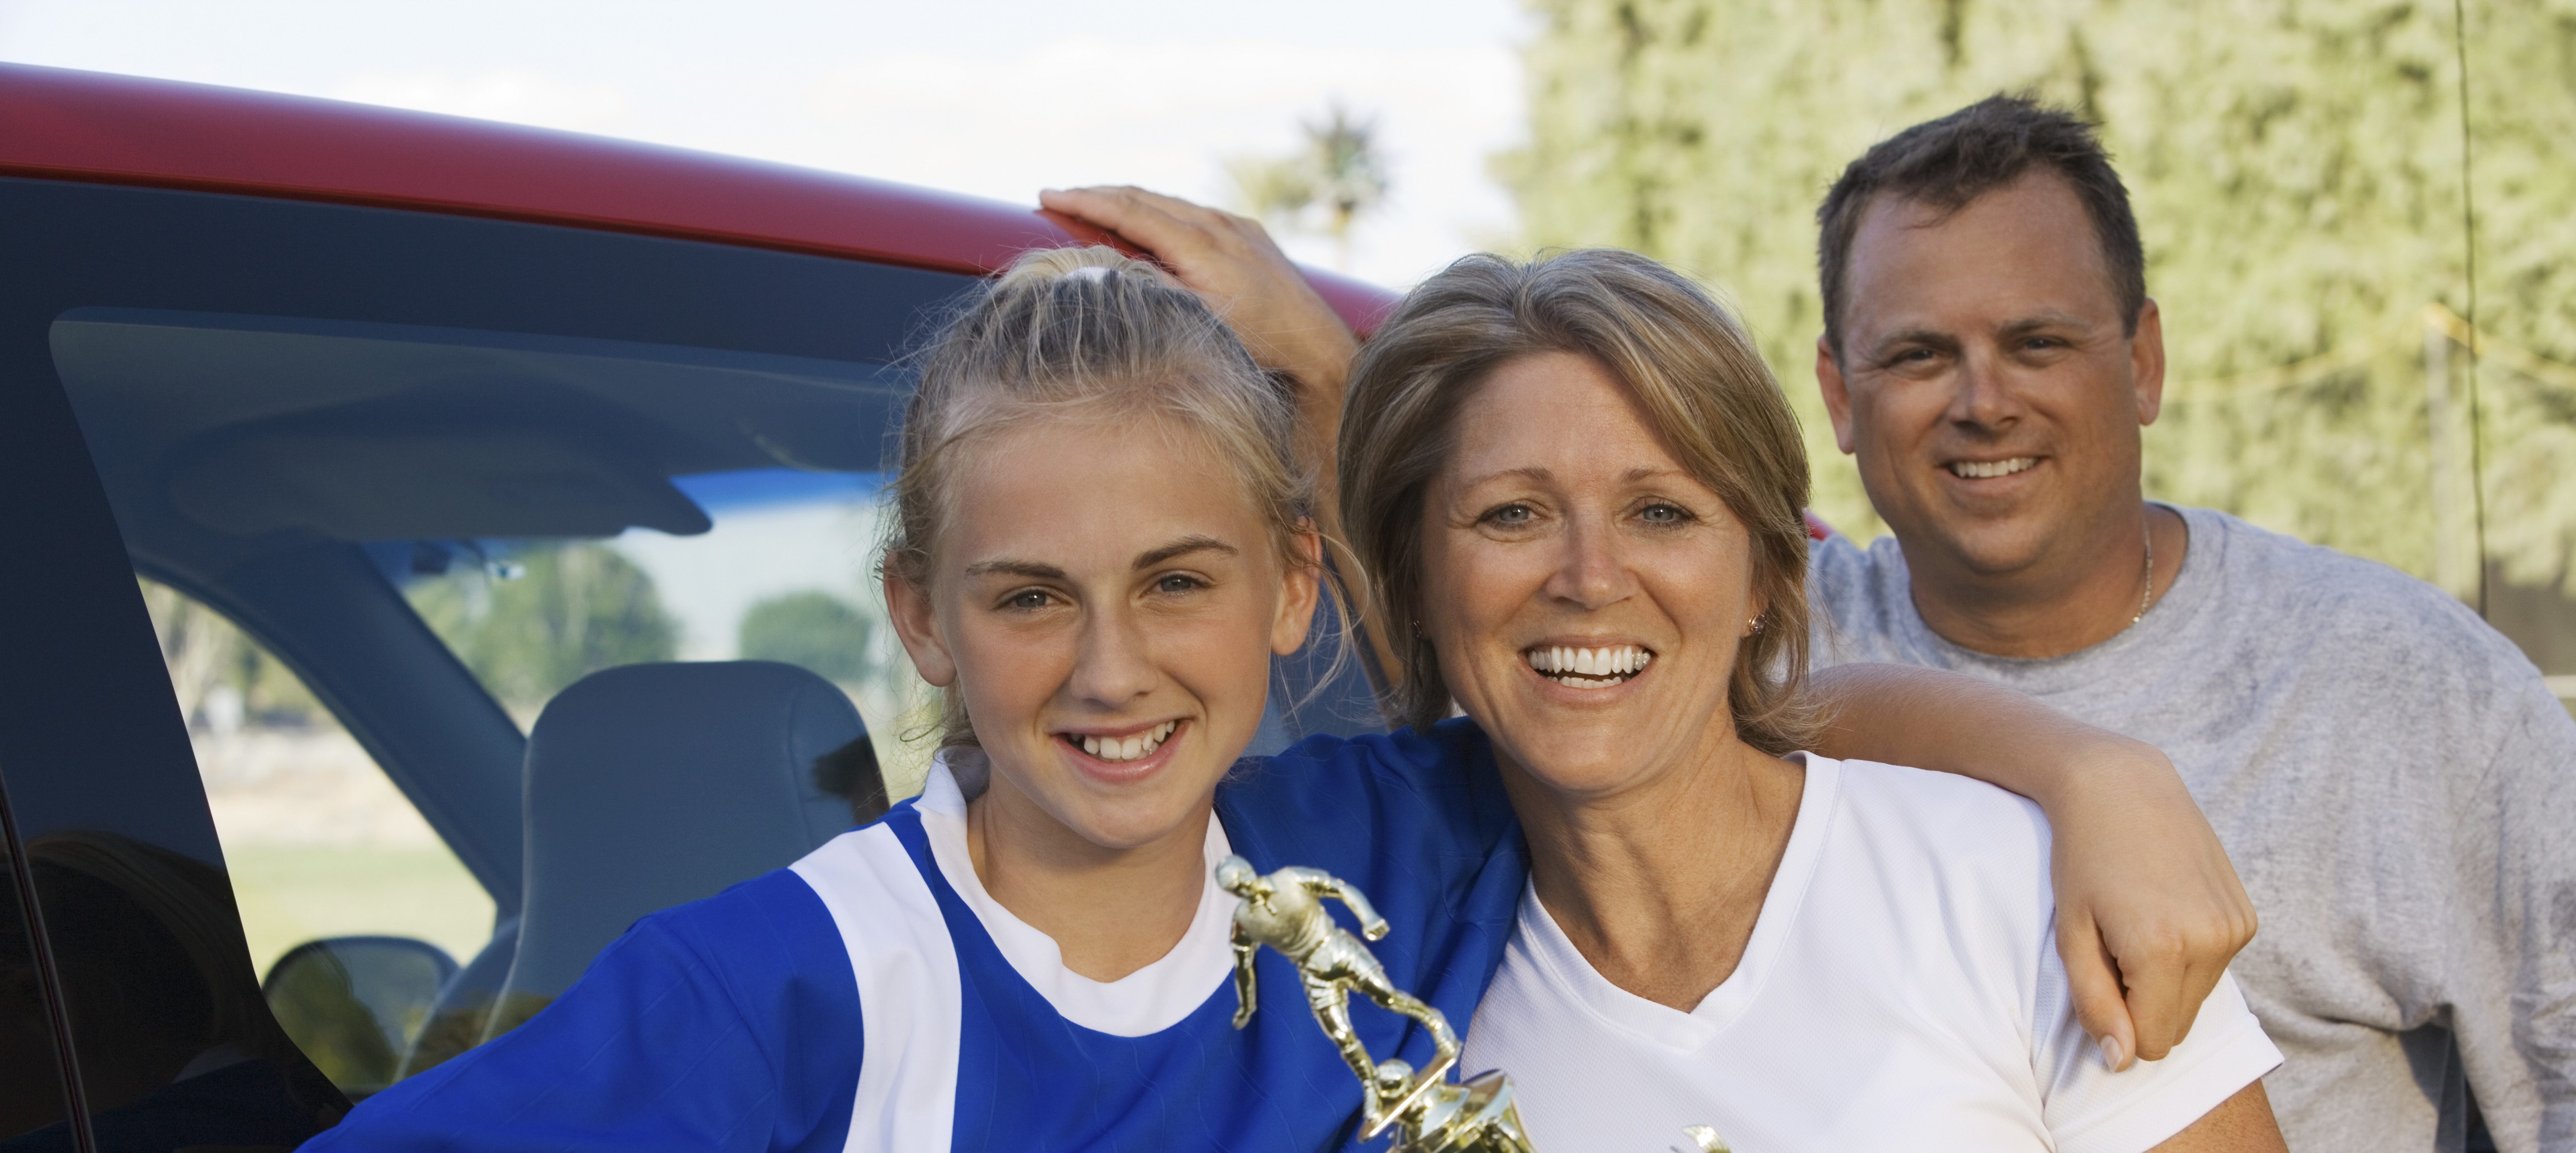 Portrait of happy parents with daughter holding soccer trophy